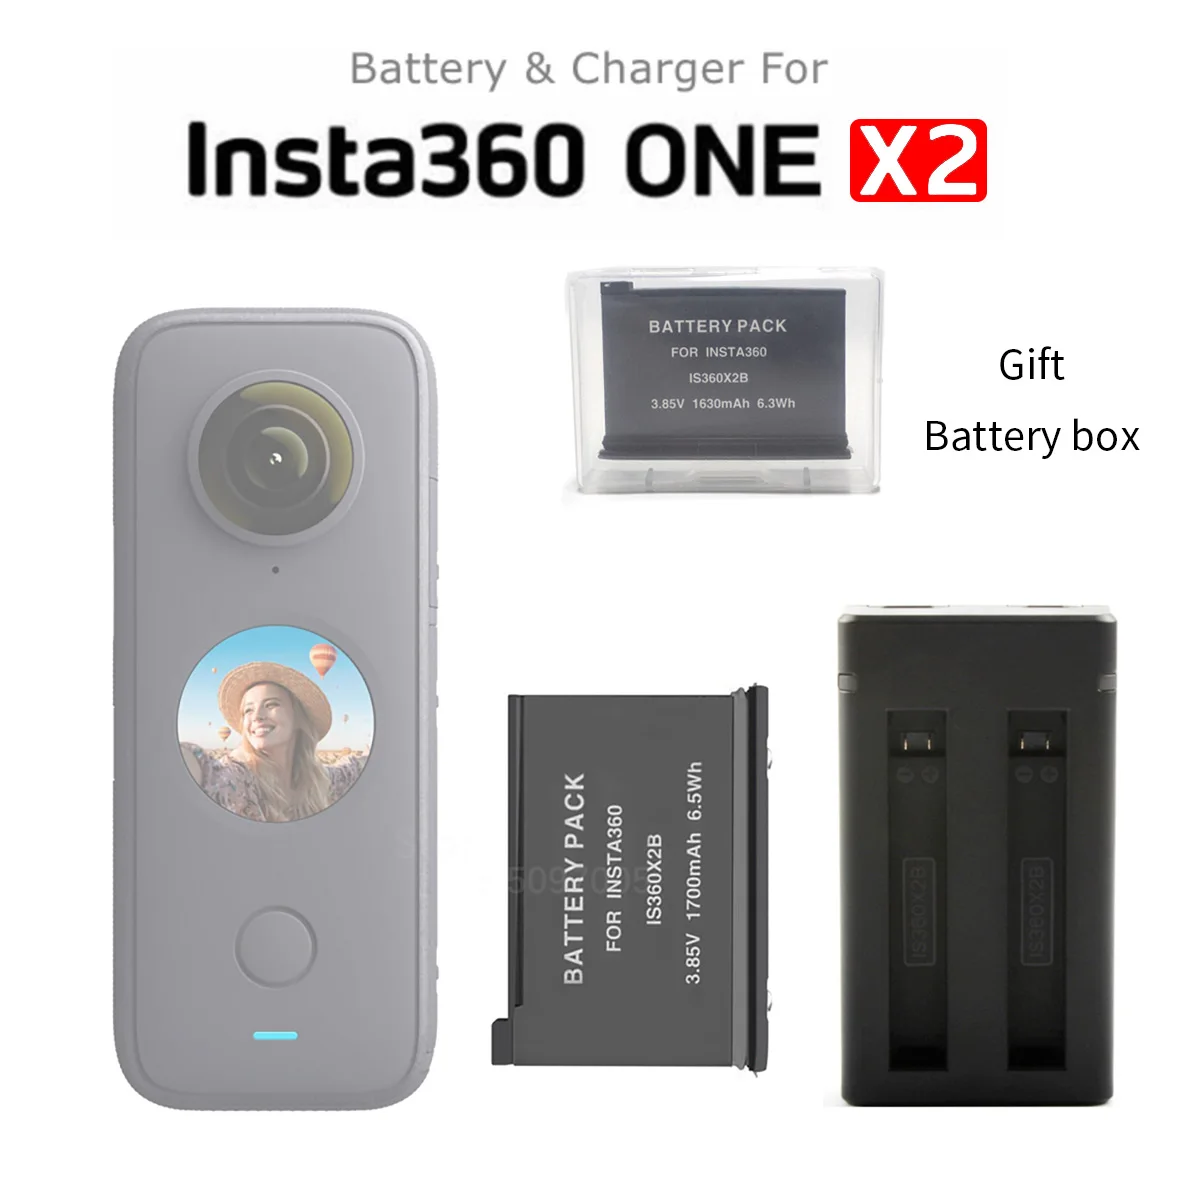 

In Stock! Insta360 One X2 Battery 1700mAh Universal 3 Batteries Charger Hub for Insta 360 One X 2 Action Camera Accessories